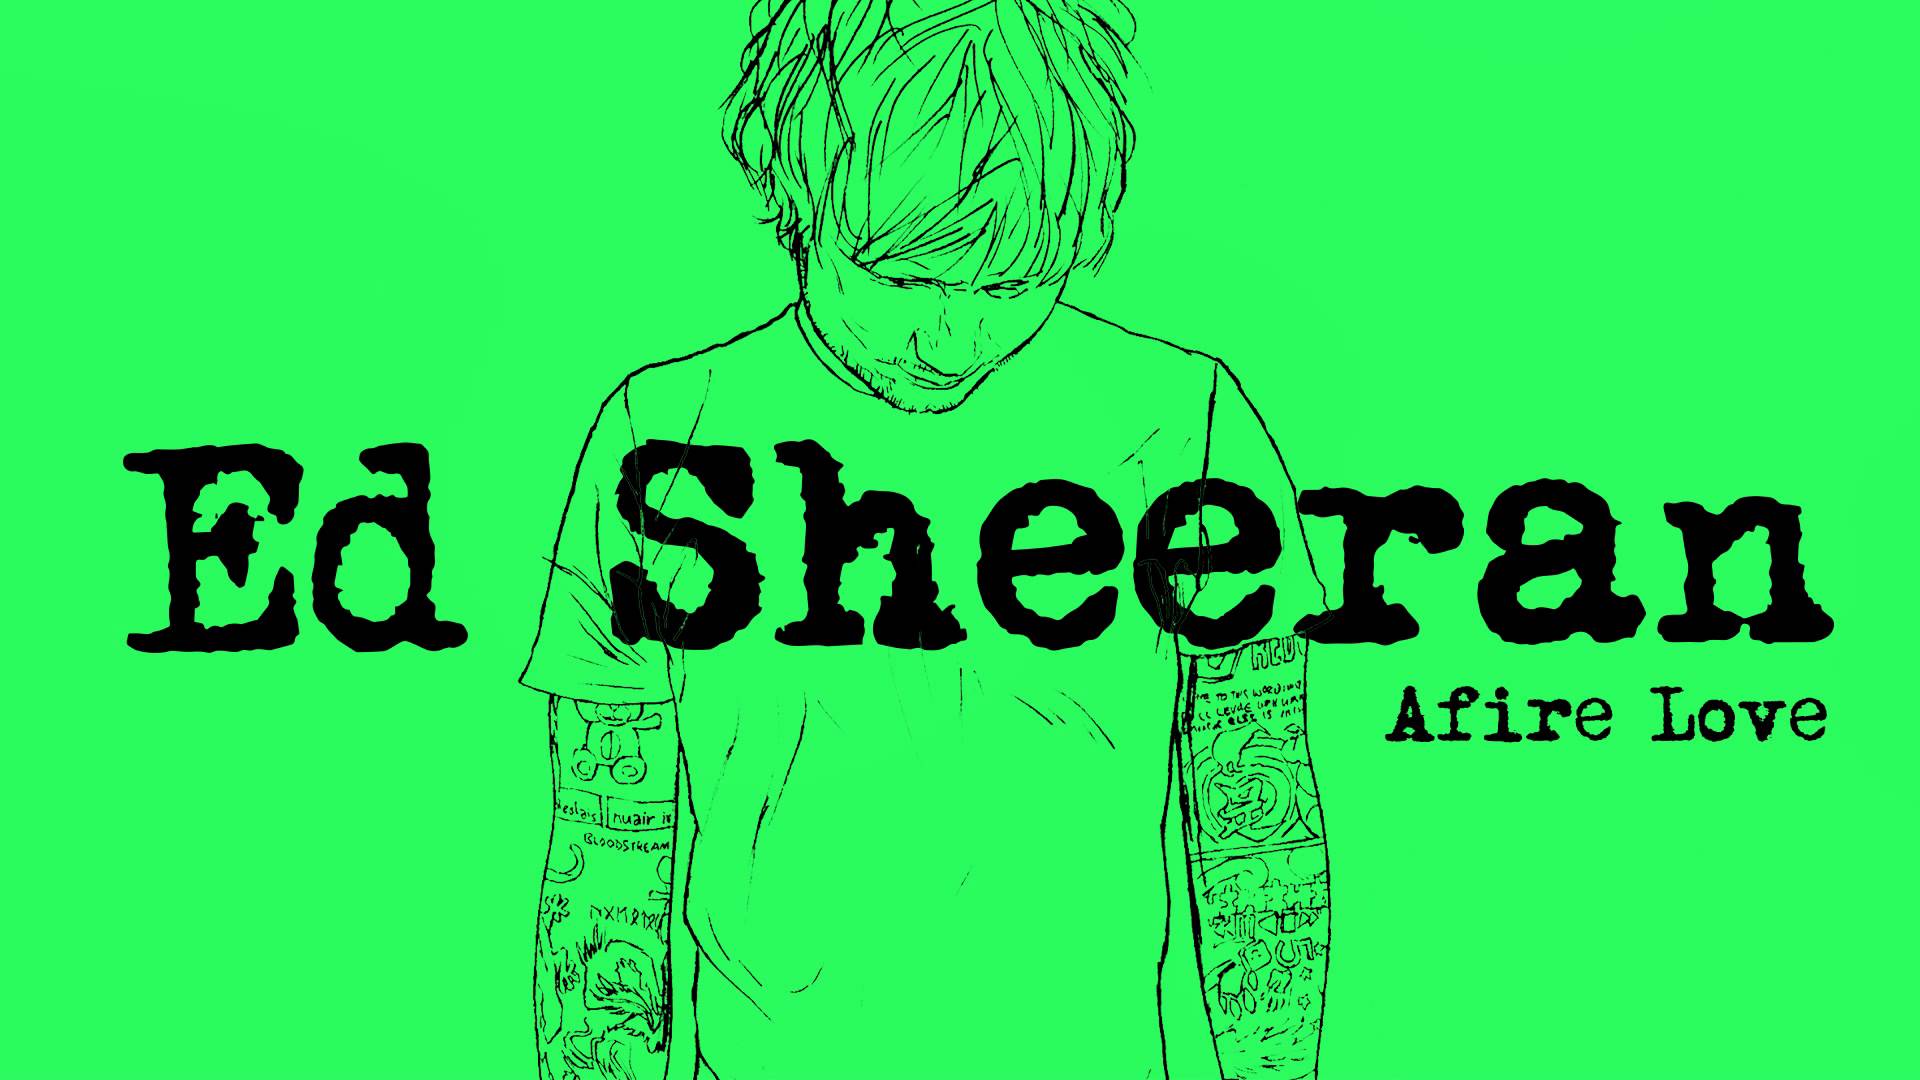 Free download Ed Sheeran Afire Love [Official] [1920x1080] for your Desktop, Mobile & Tablet. Explore YouTube Desktop Wallpaperx1152 Wallpaper for YouTube, Free Wallpaper for YouTube, YouTube Wallpaper Downloads